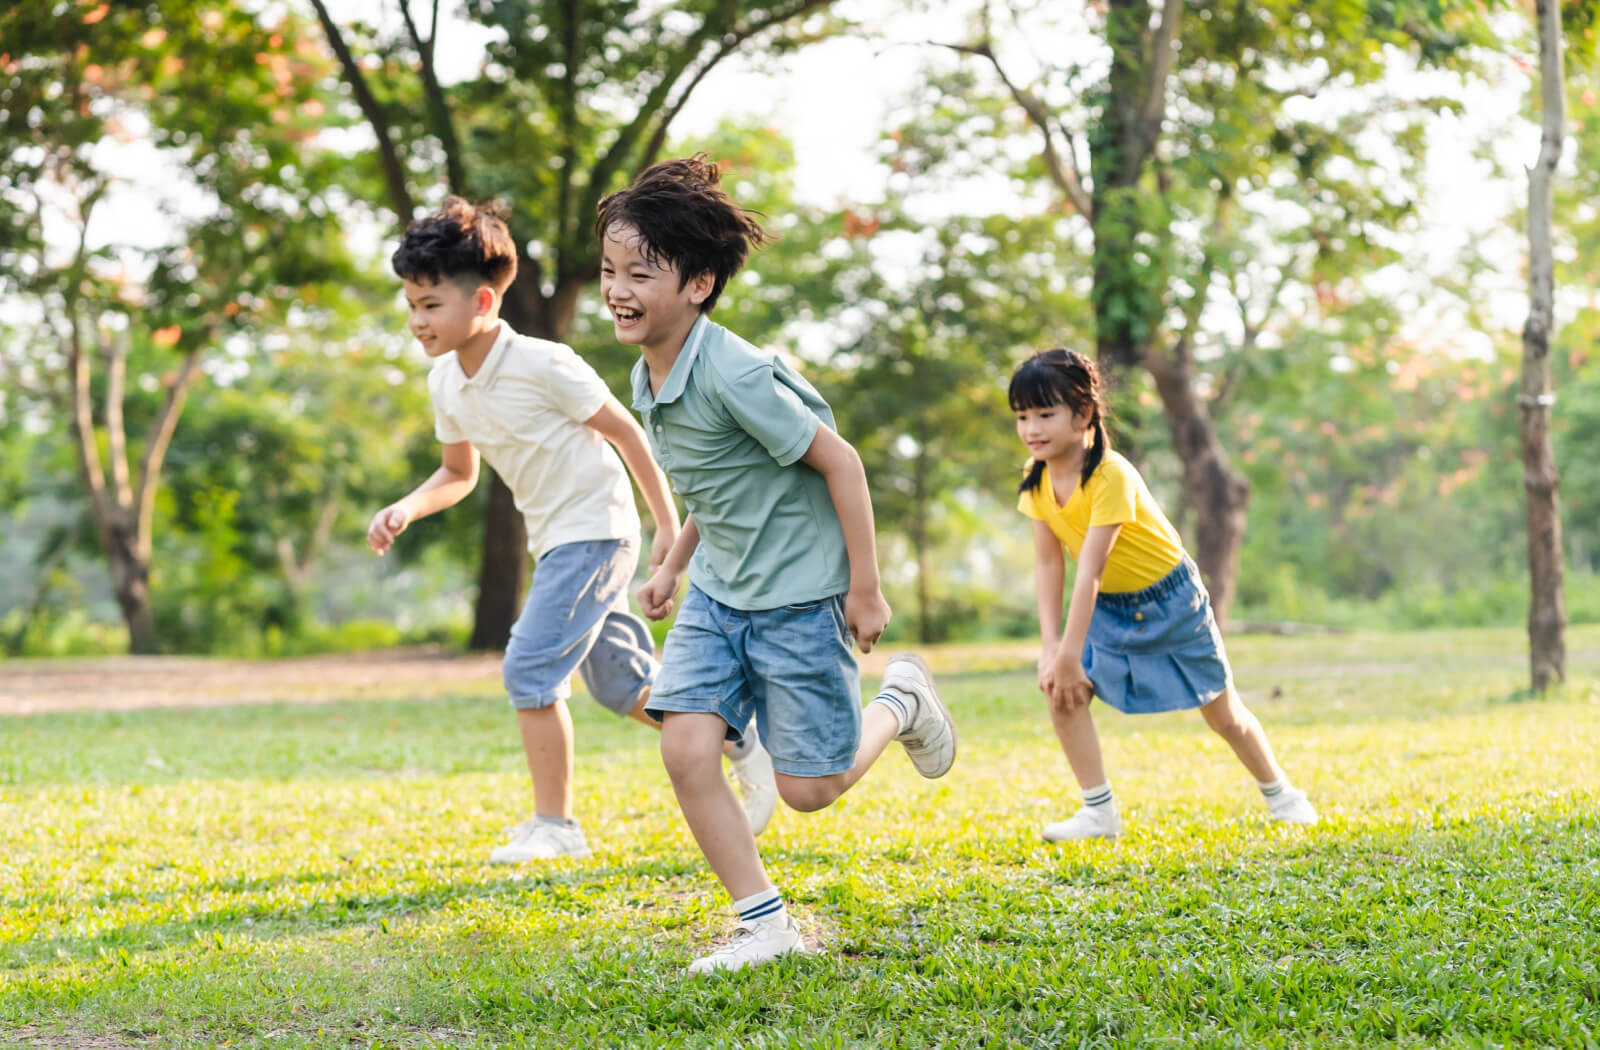 A group of children playing and running outdoors.